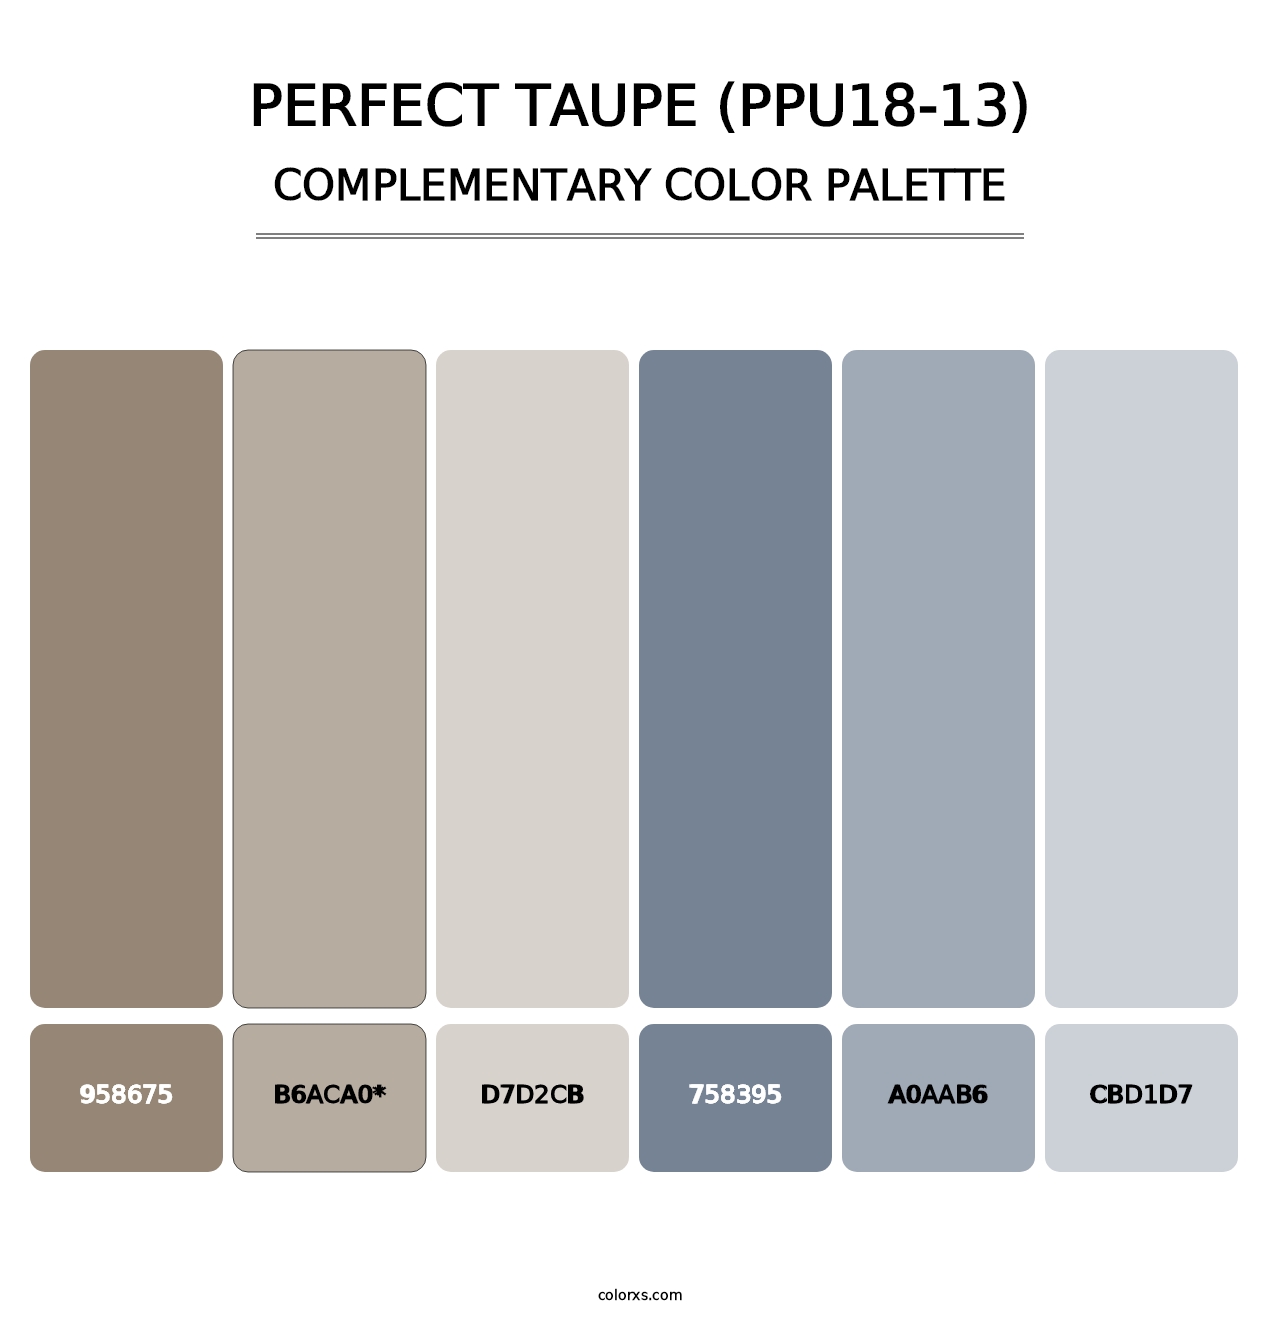 Perfect Taupe (PPU18-13) - Complementary Color Palette